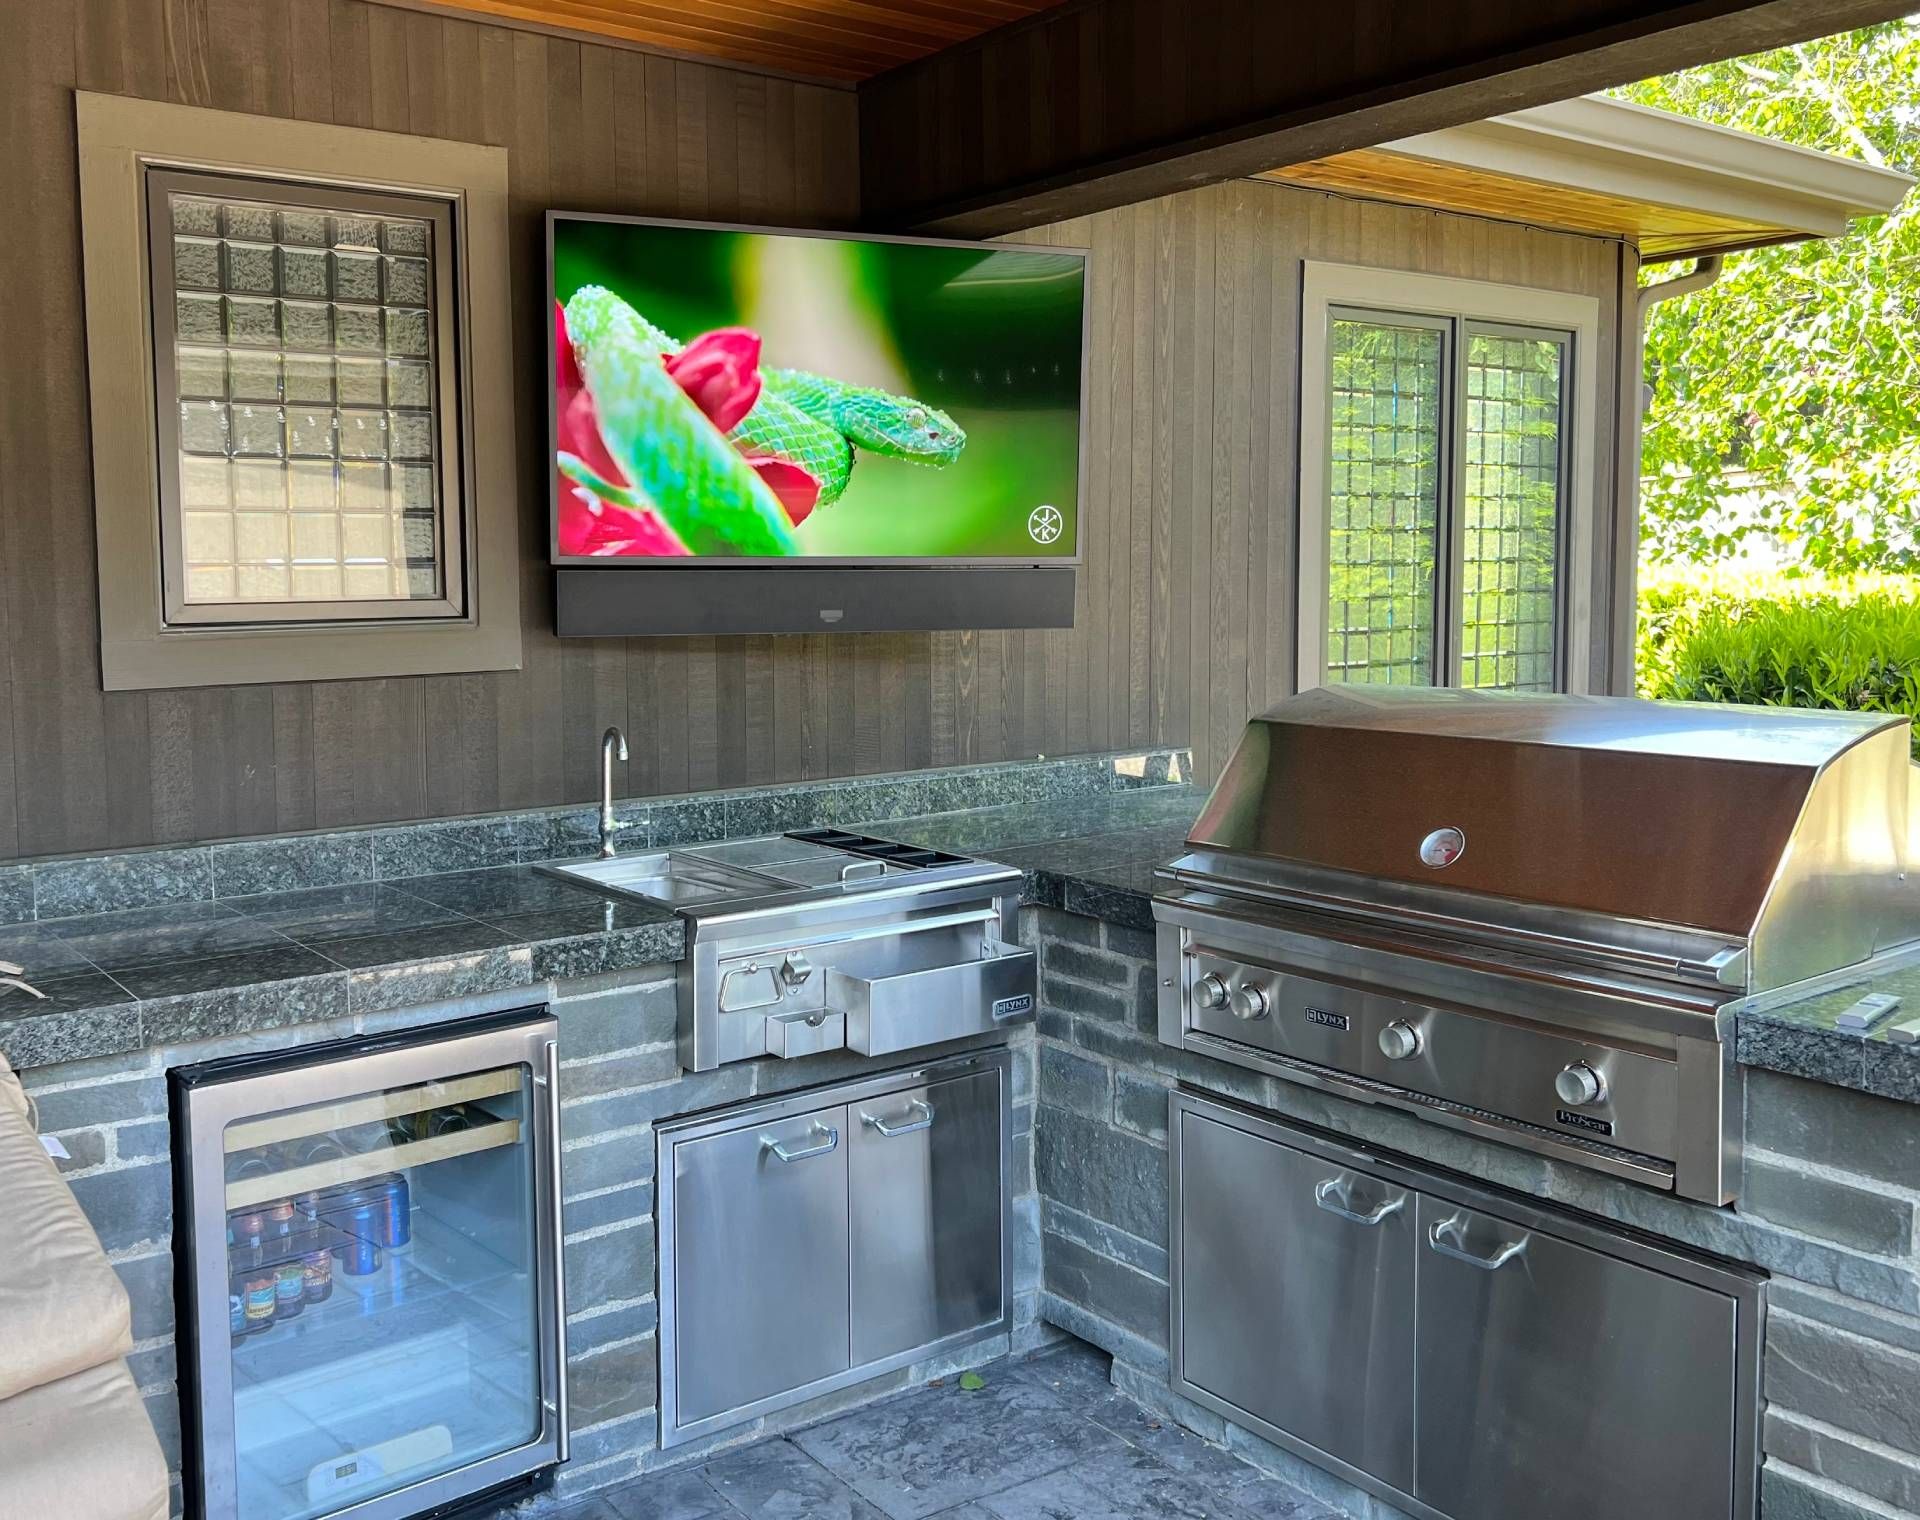 Wall mounted TV in outdoor kitchen